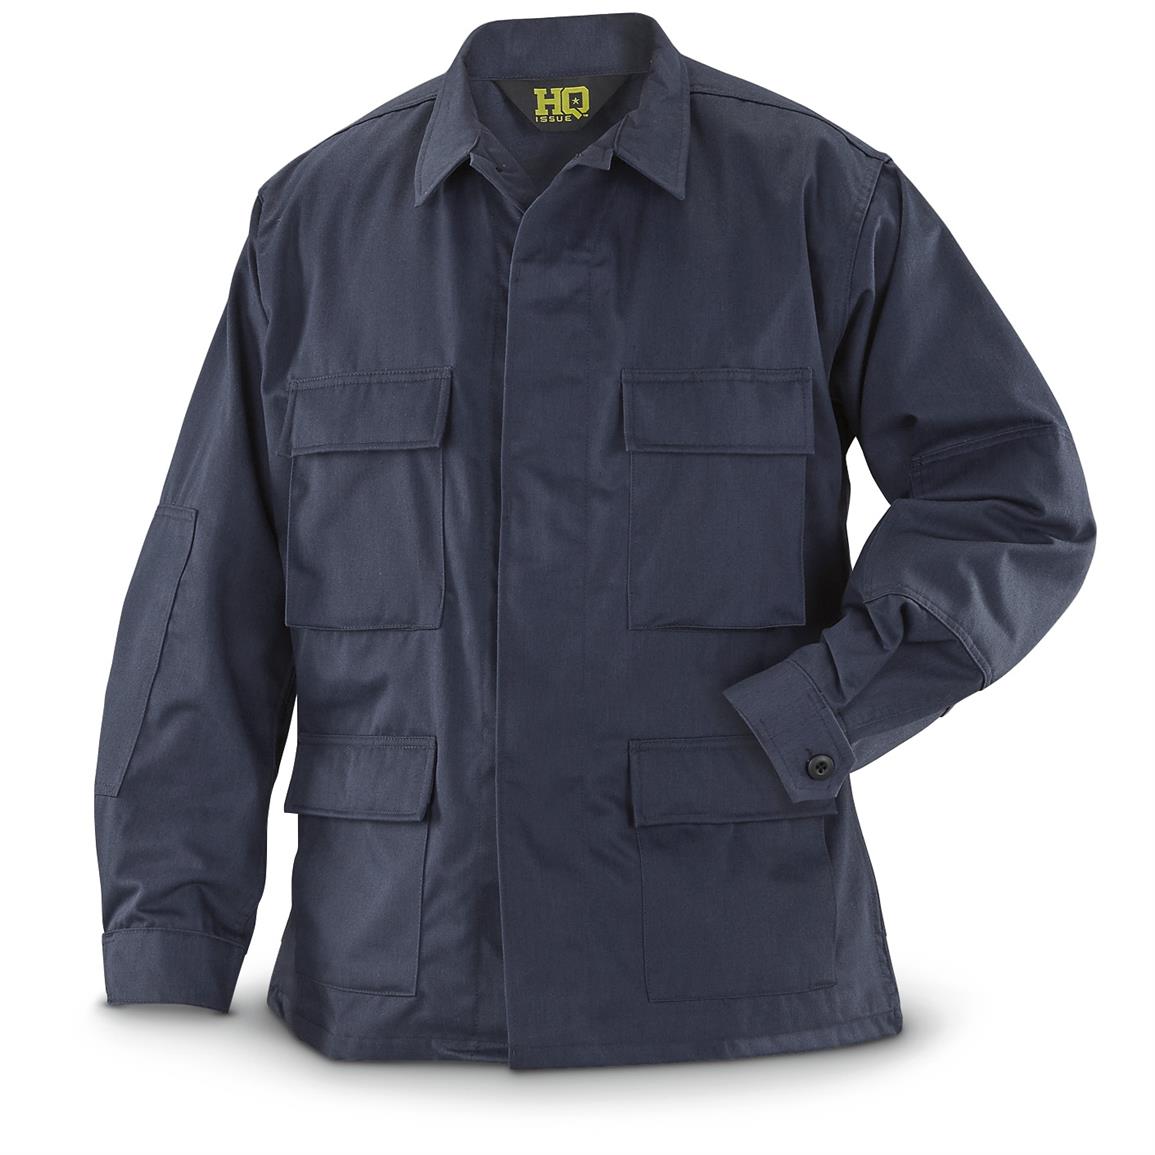 HQ ISSUE Military-style NYCO BDU Tactical Shirt - 633891, Tactical ...